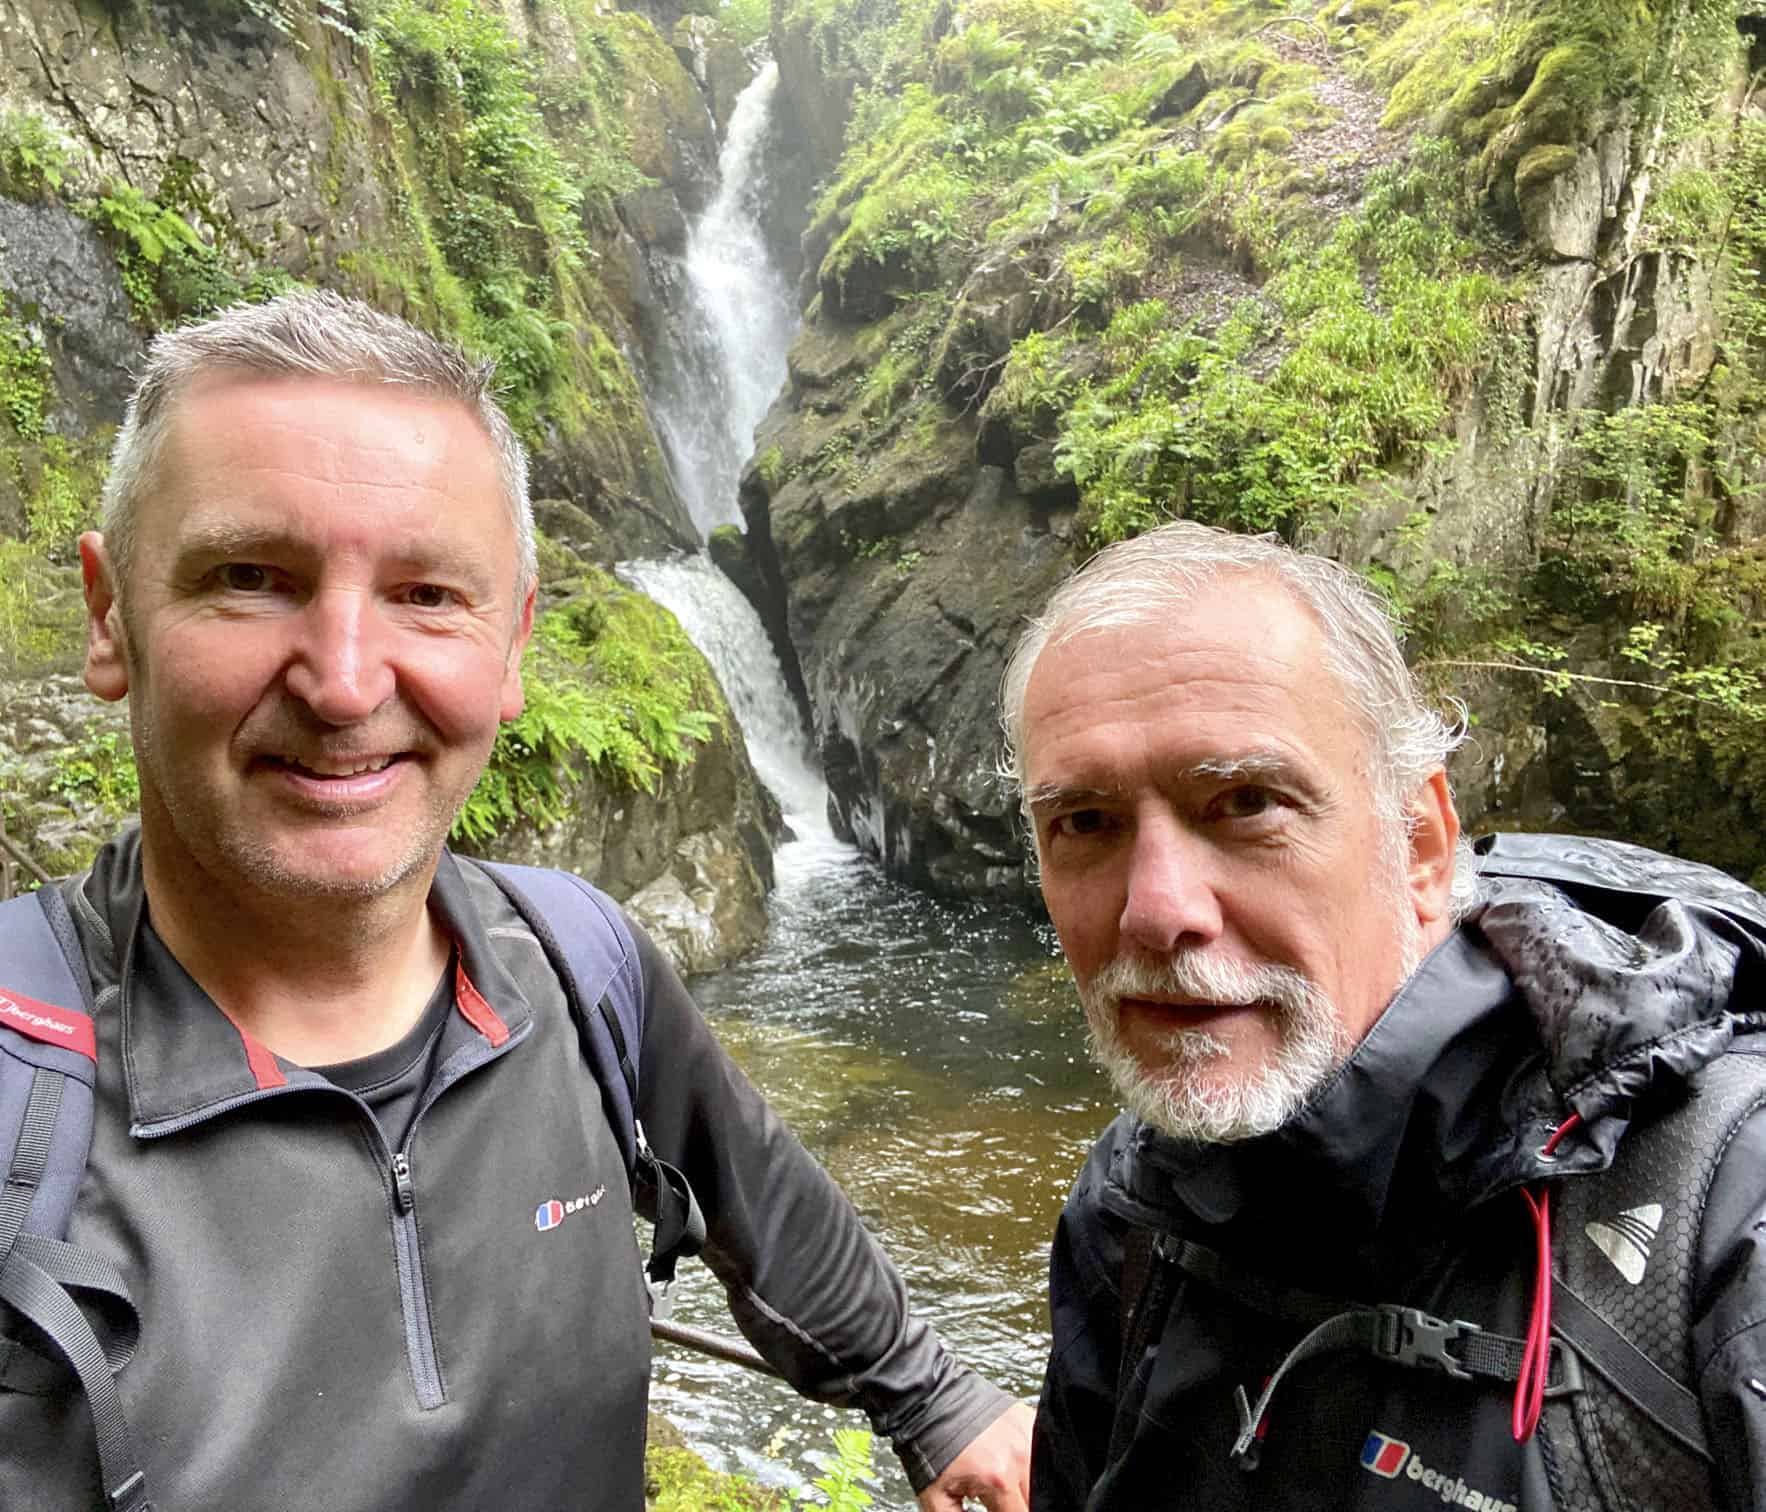 Mike and I at Aira Force, about halfway around our Gowbarrow Fell walk.